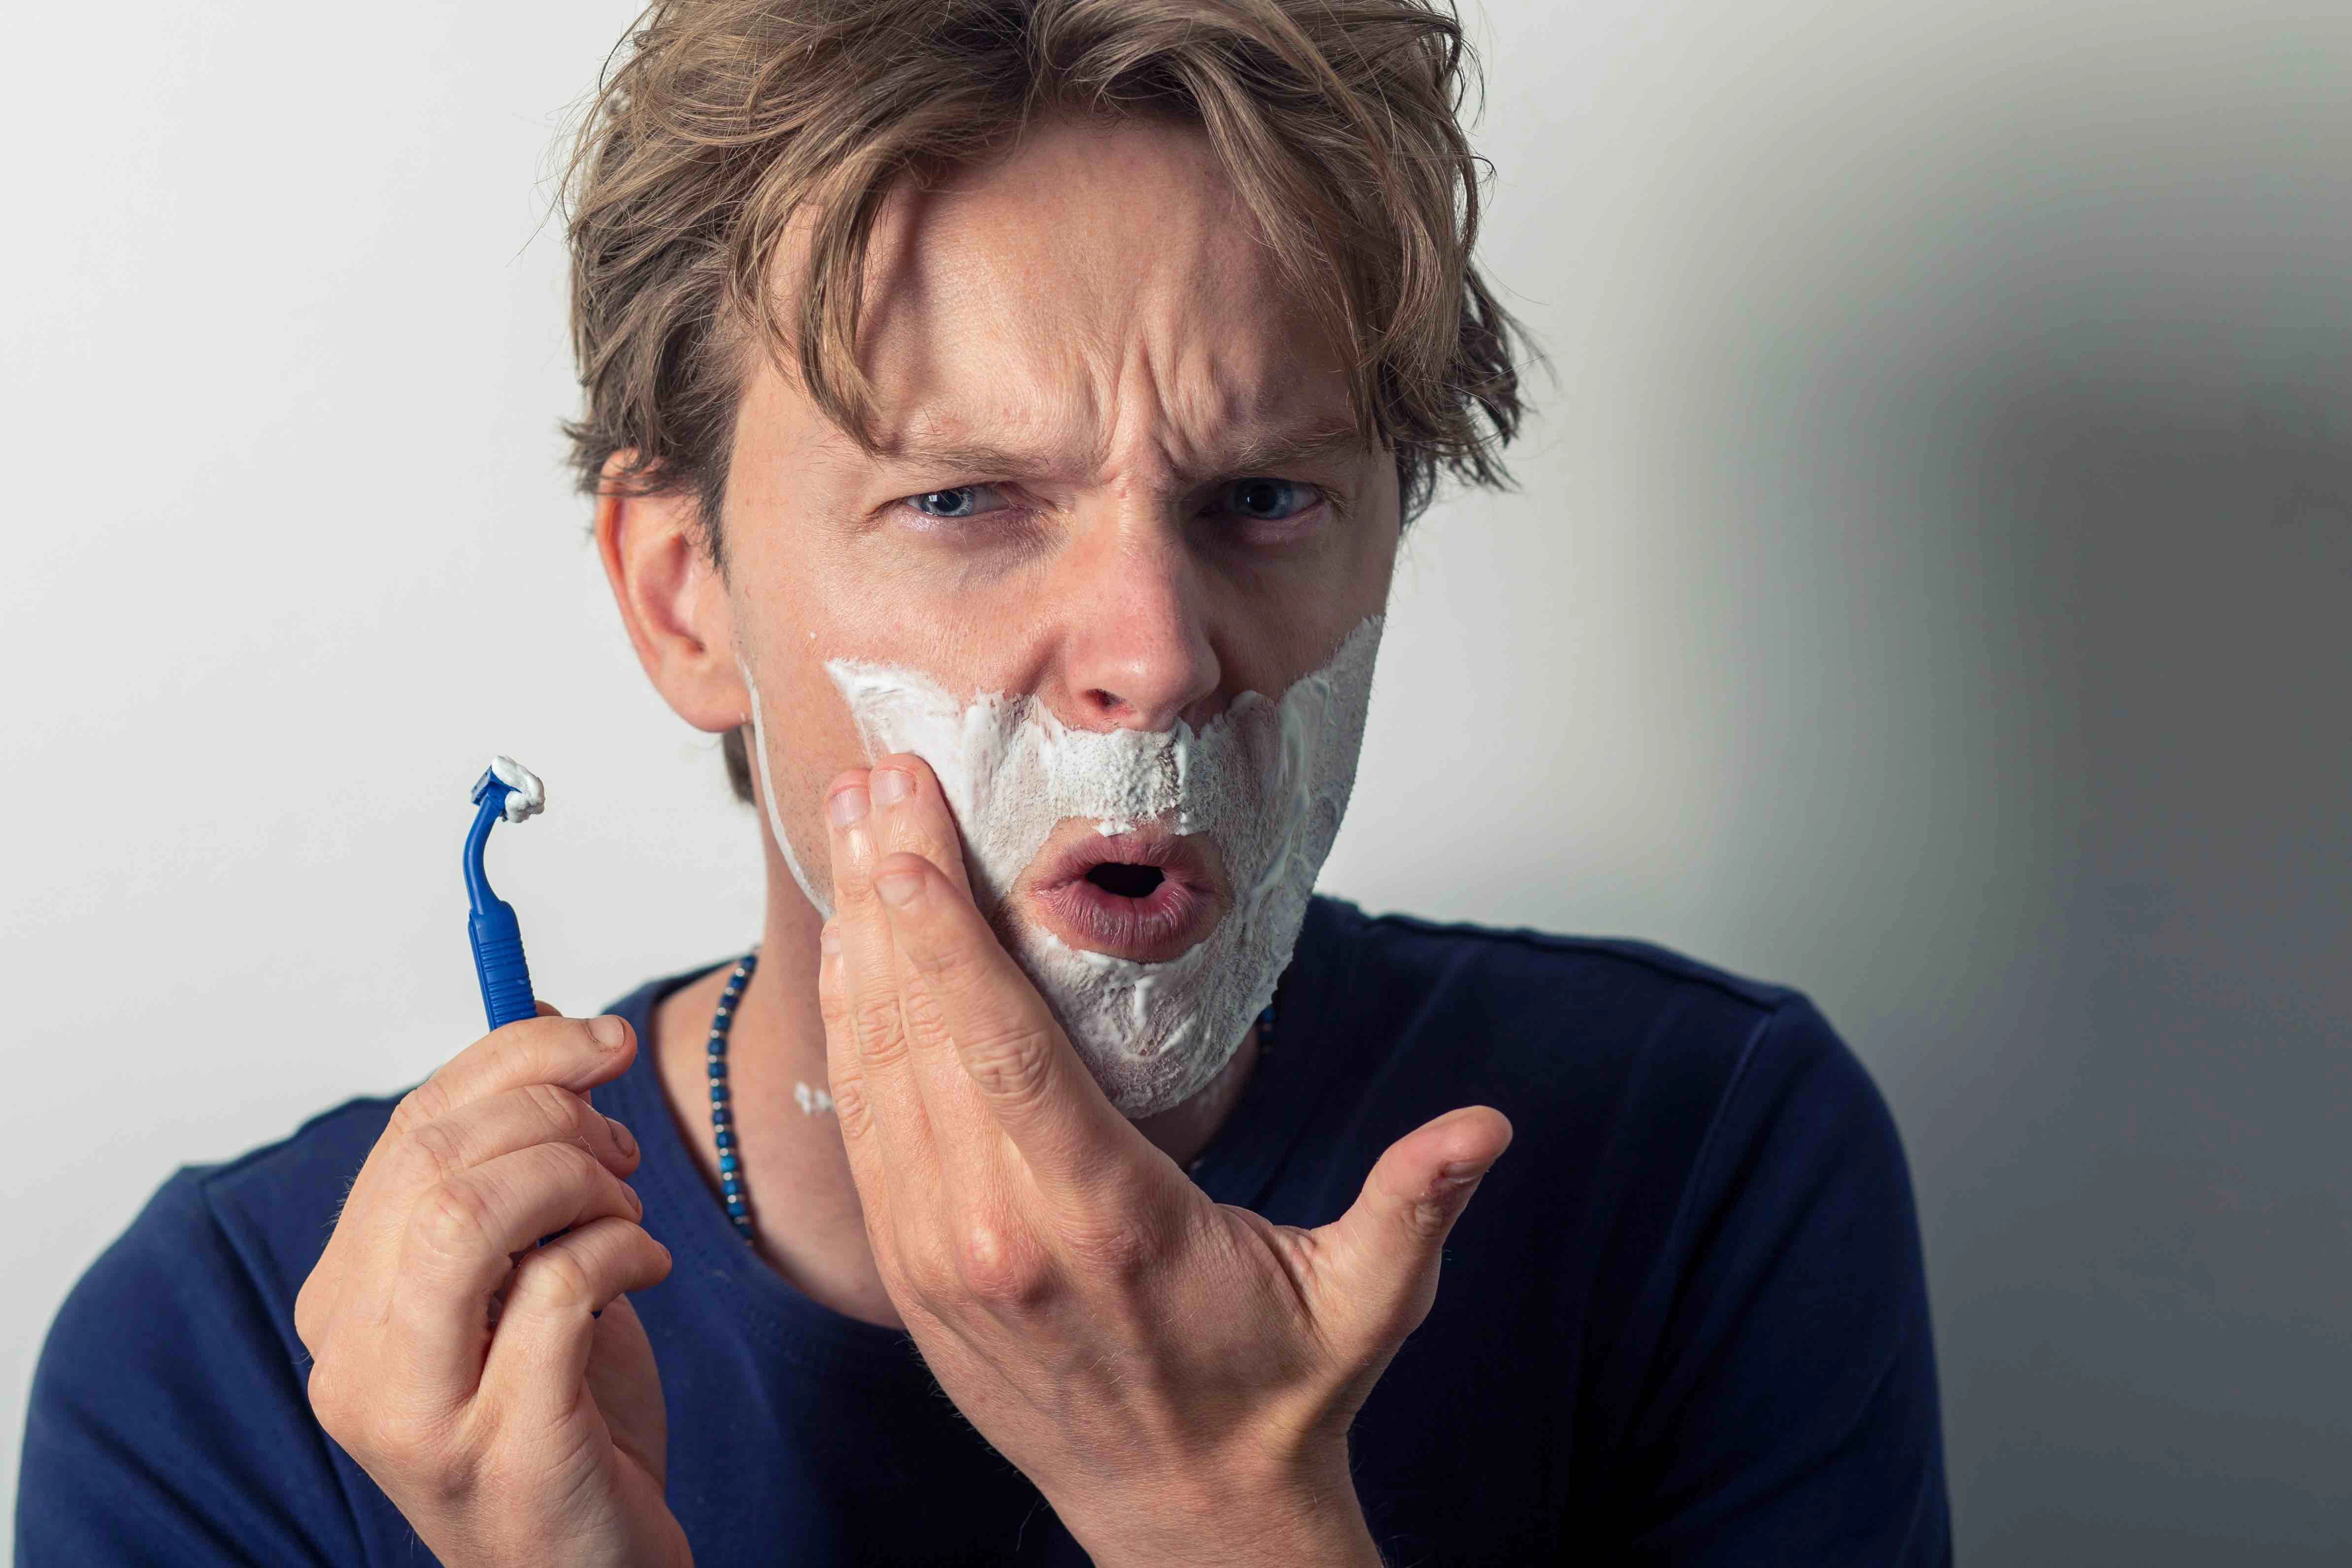 is wet shaving bad for your skin if you are an older man